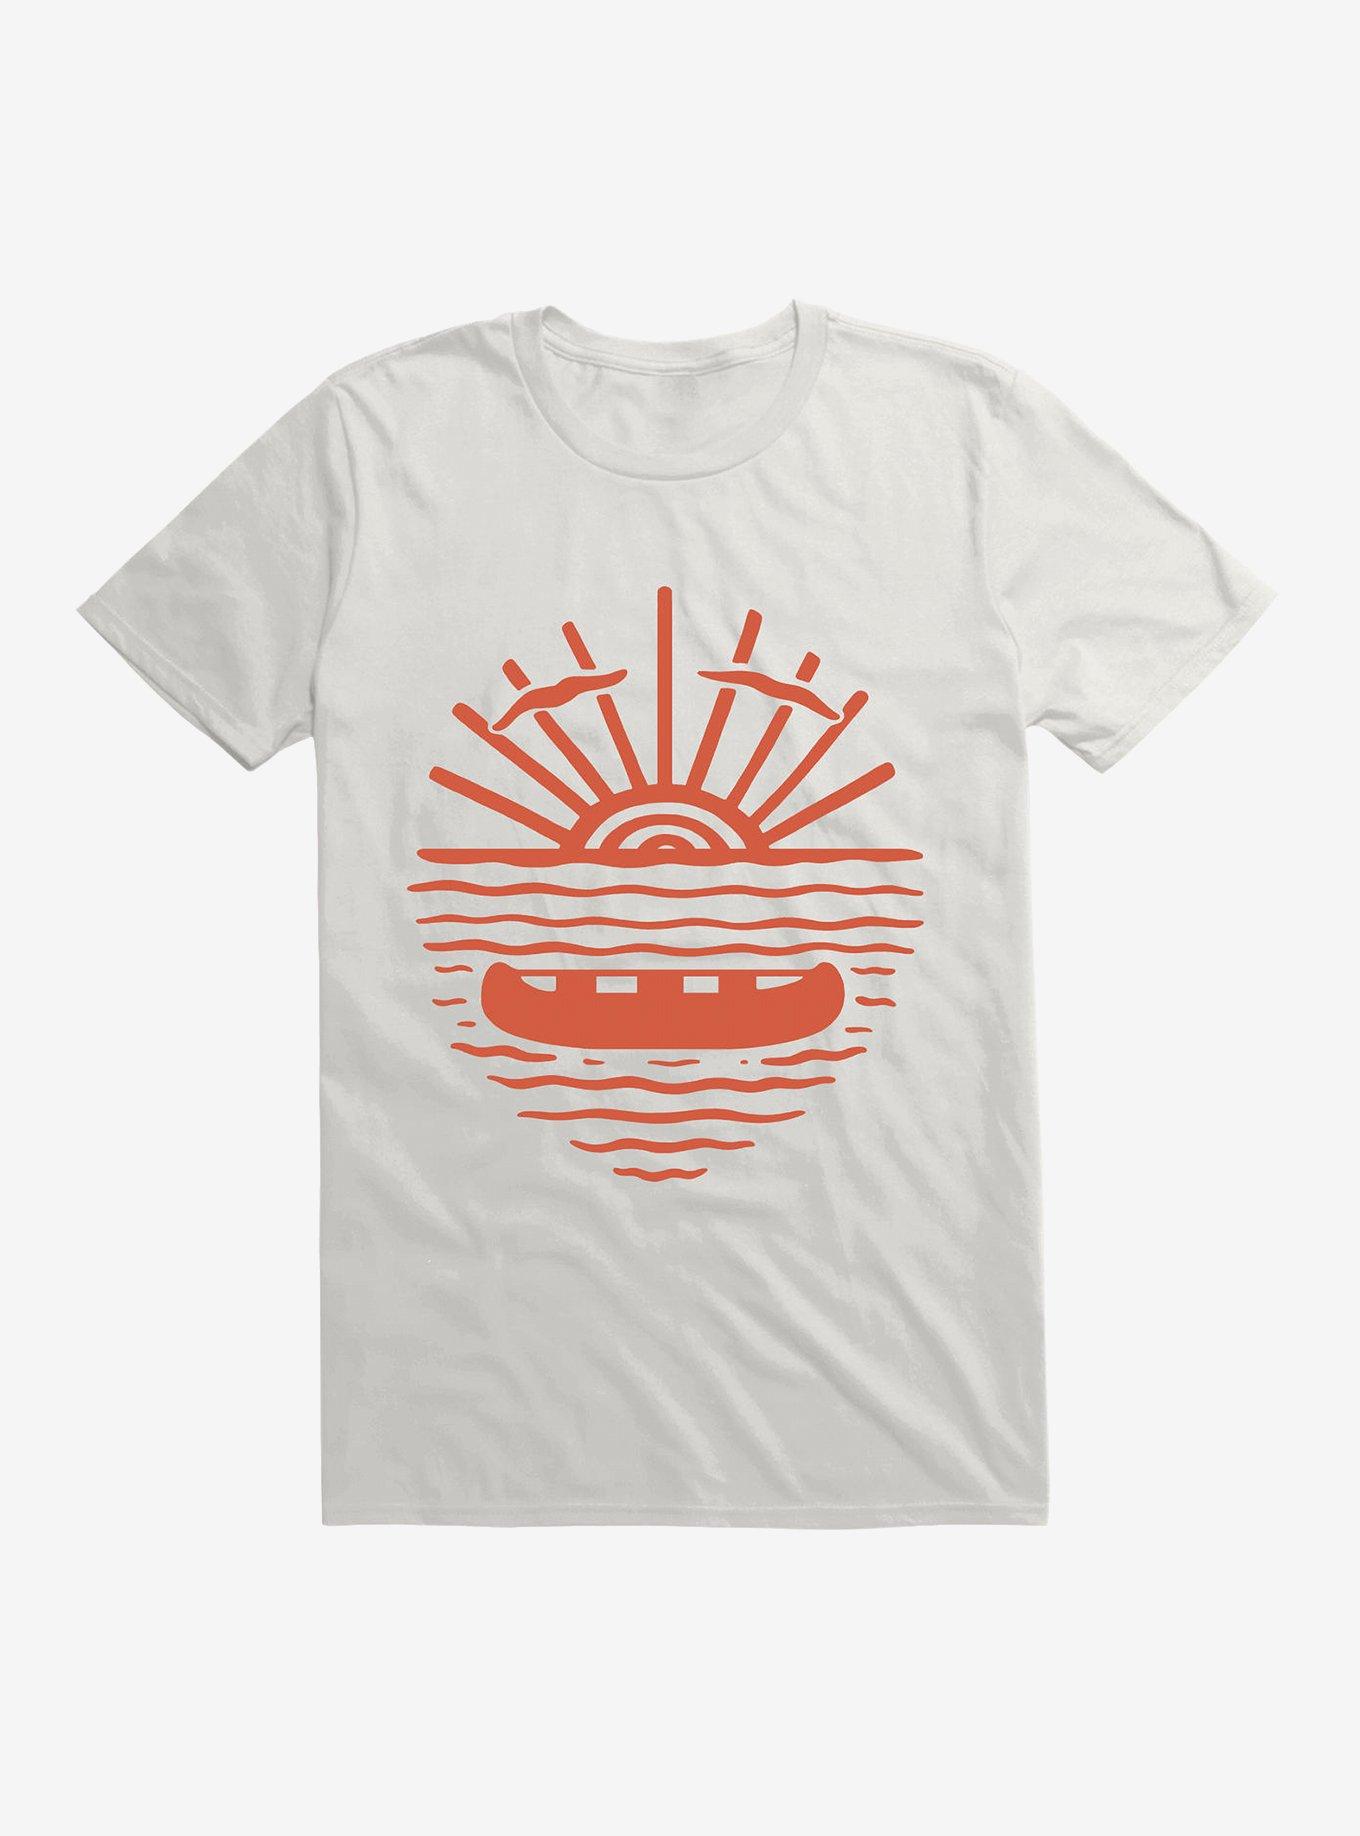 A New Wave T-Shirt, WHITE, hi-res